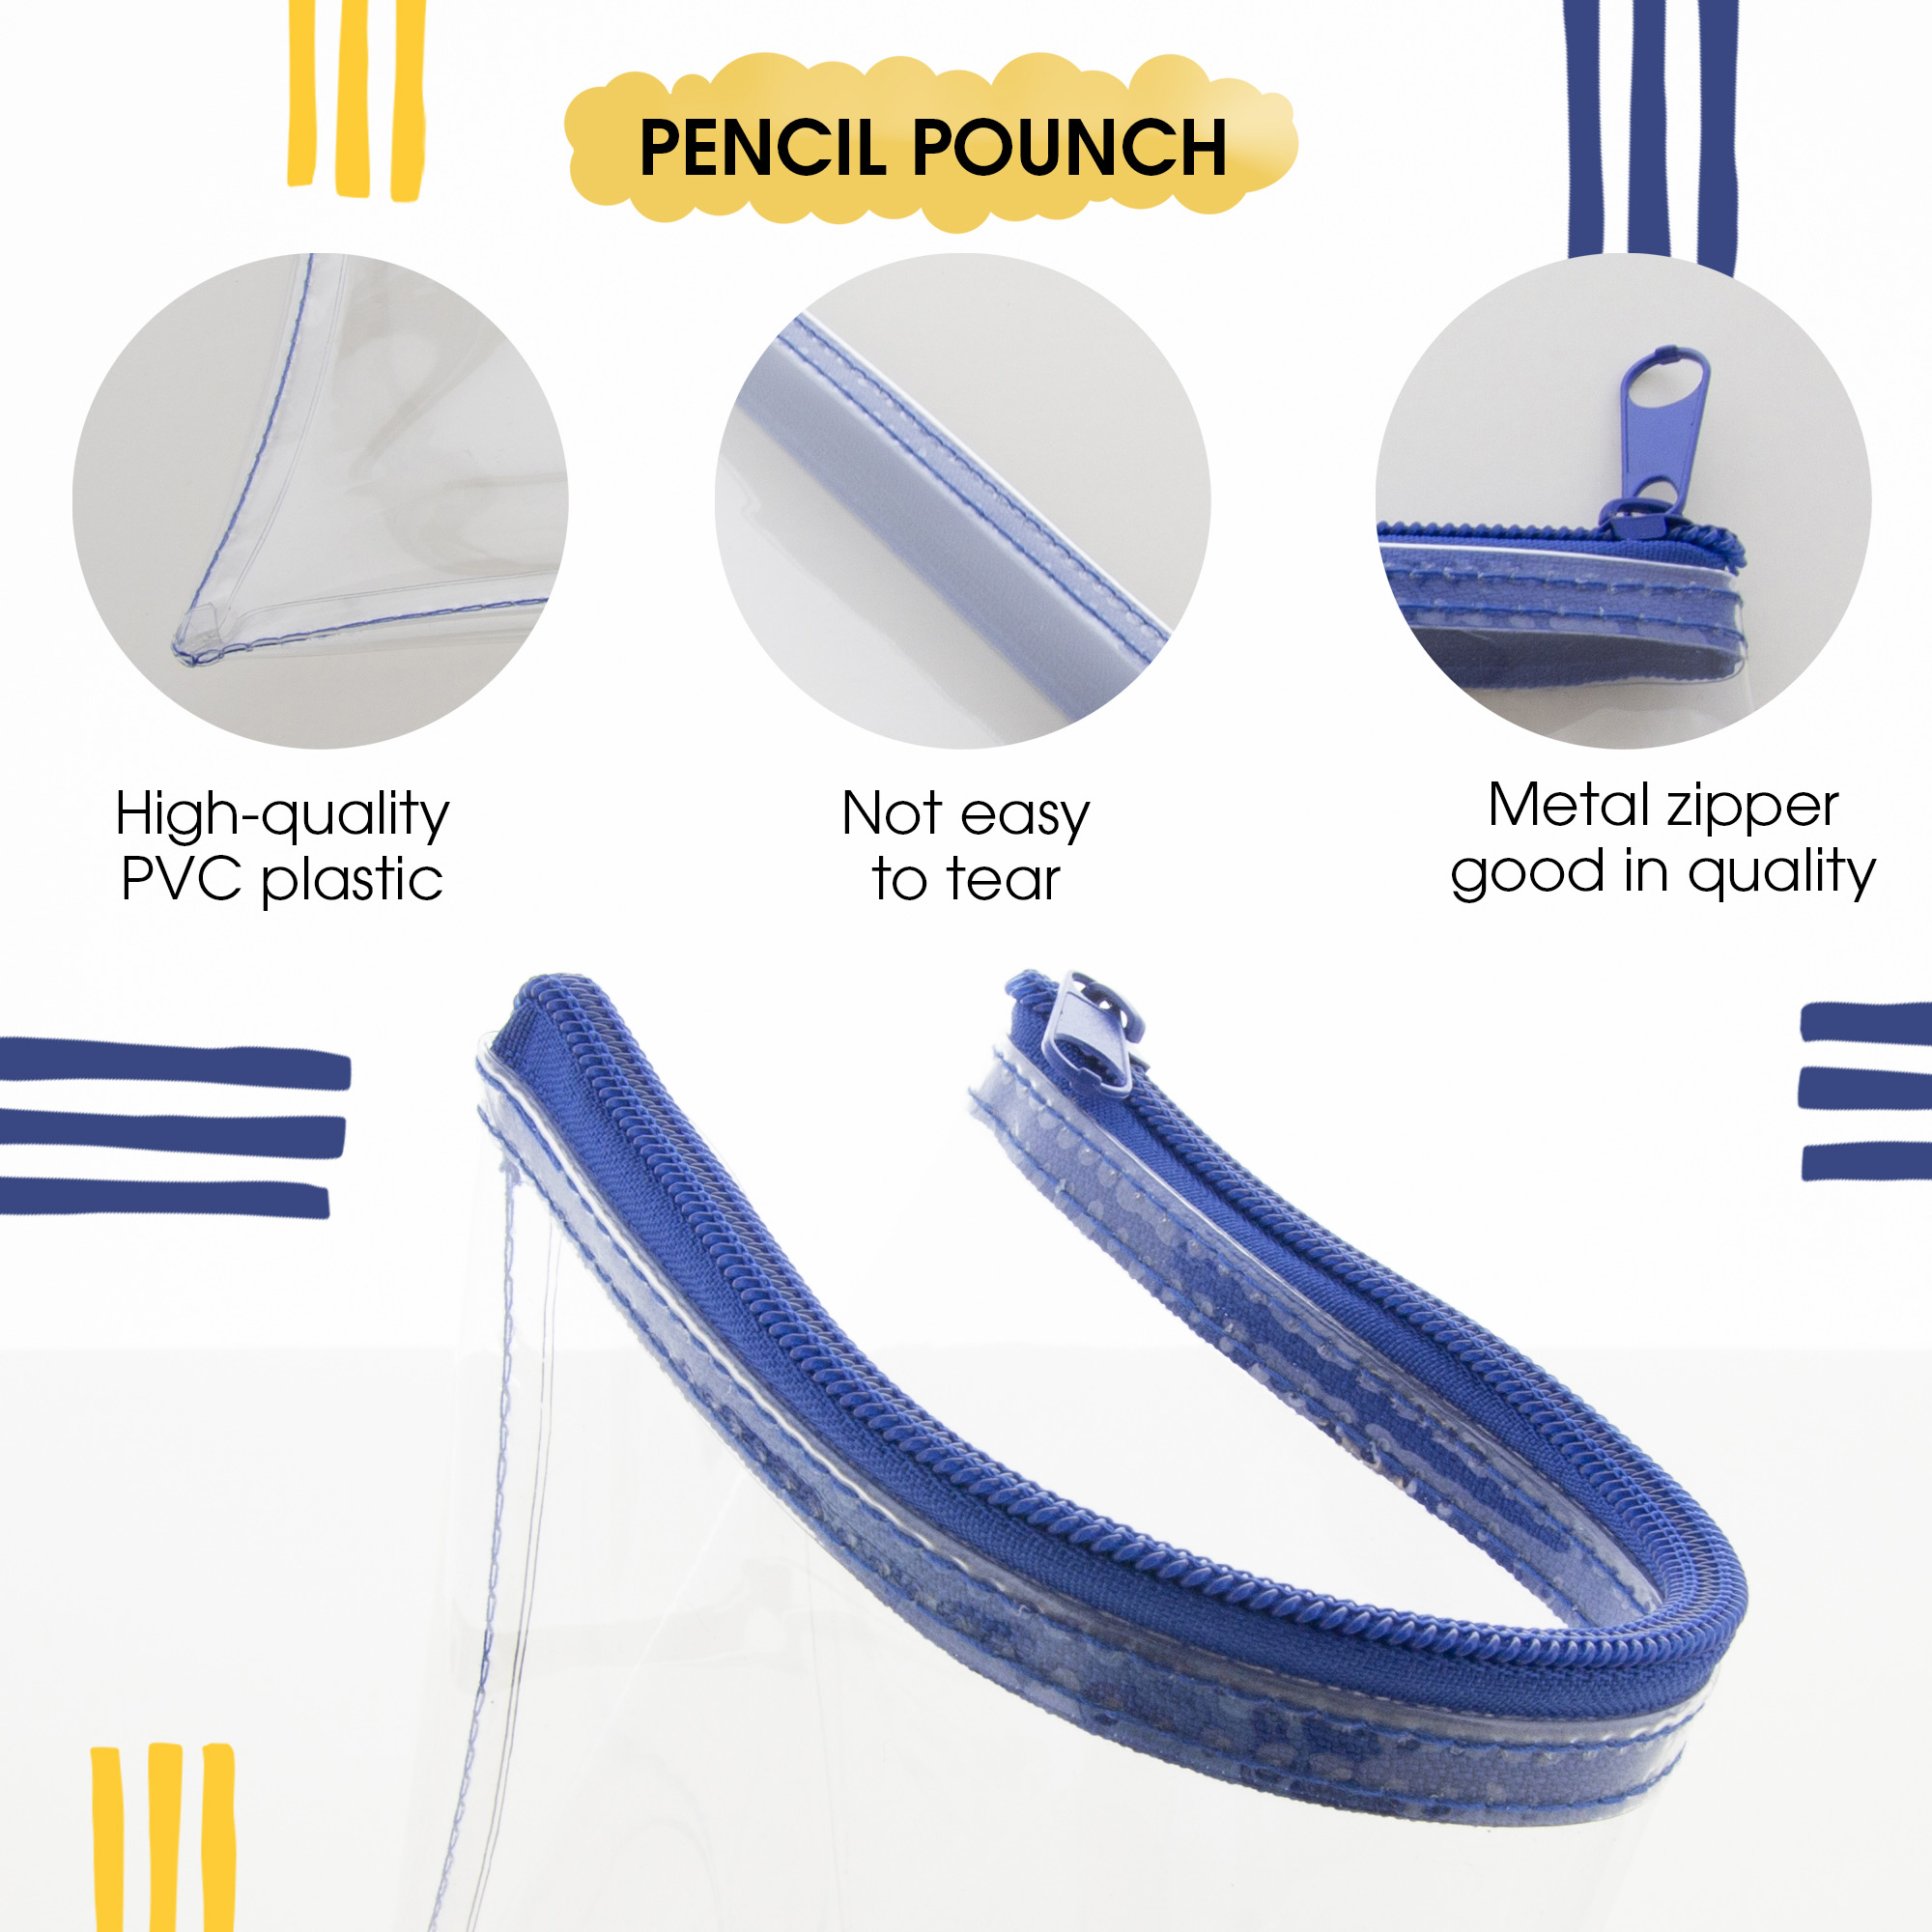 Bazic Products 805 11.5 x 6.5 3-Ring Clear Pencil Pouch - Pack of 24